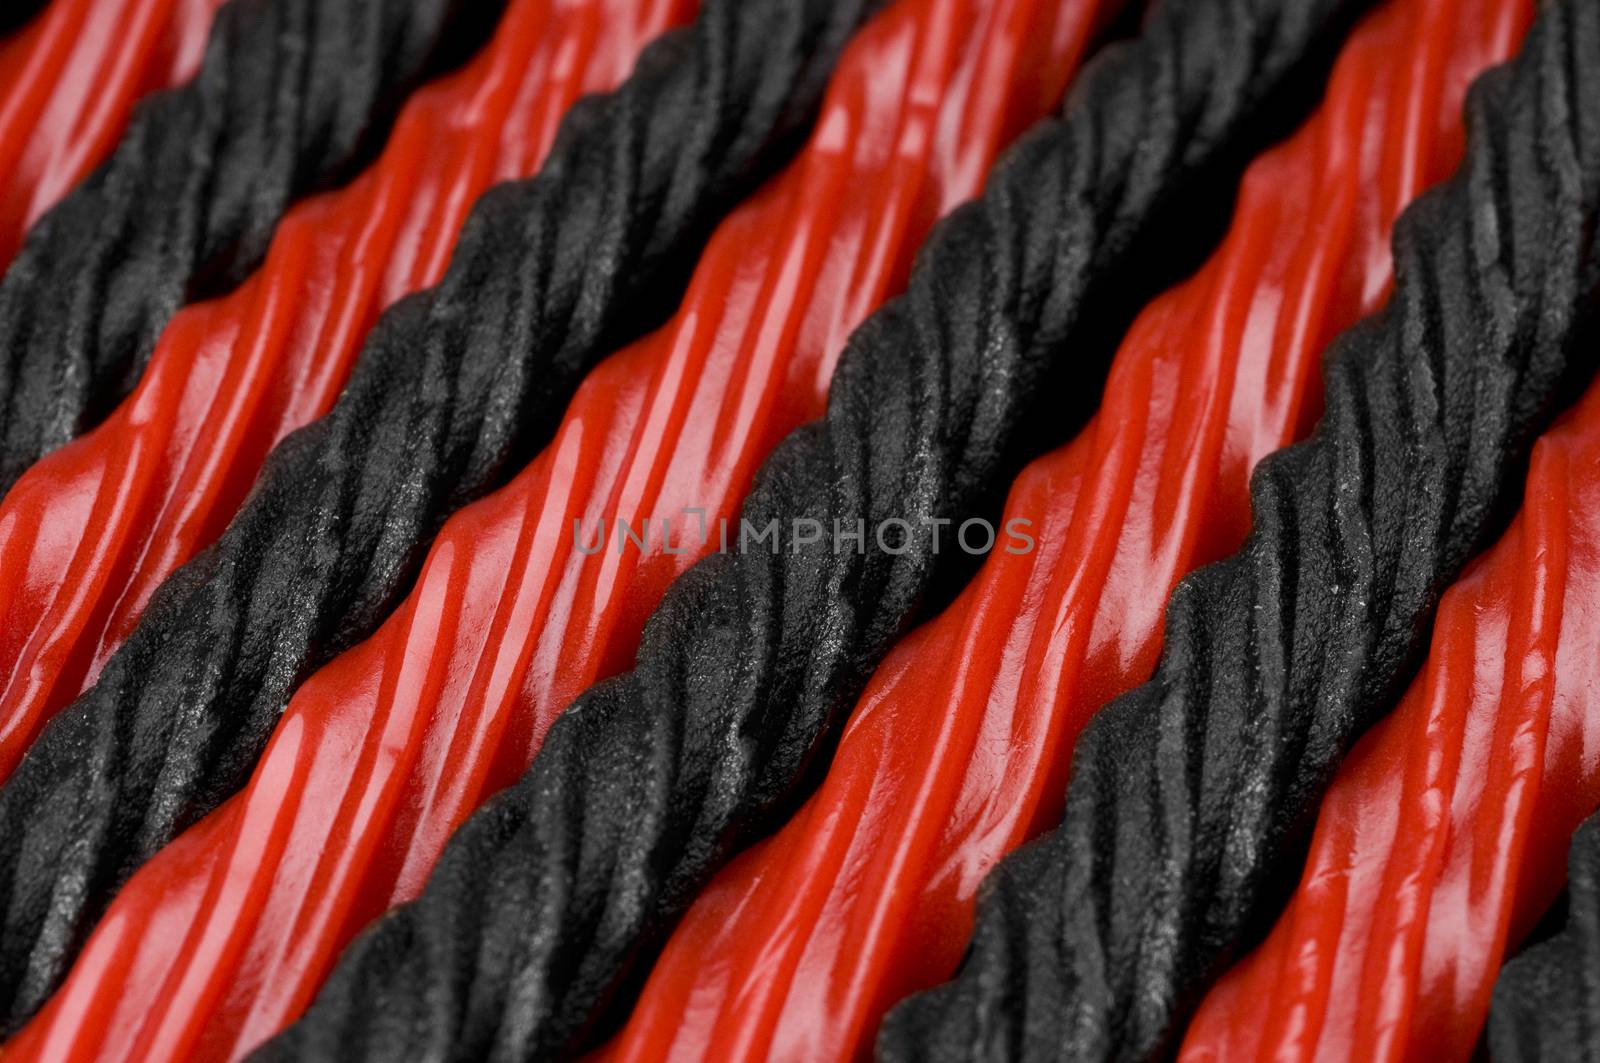 red and black licorice by Njean